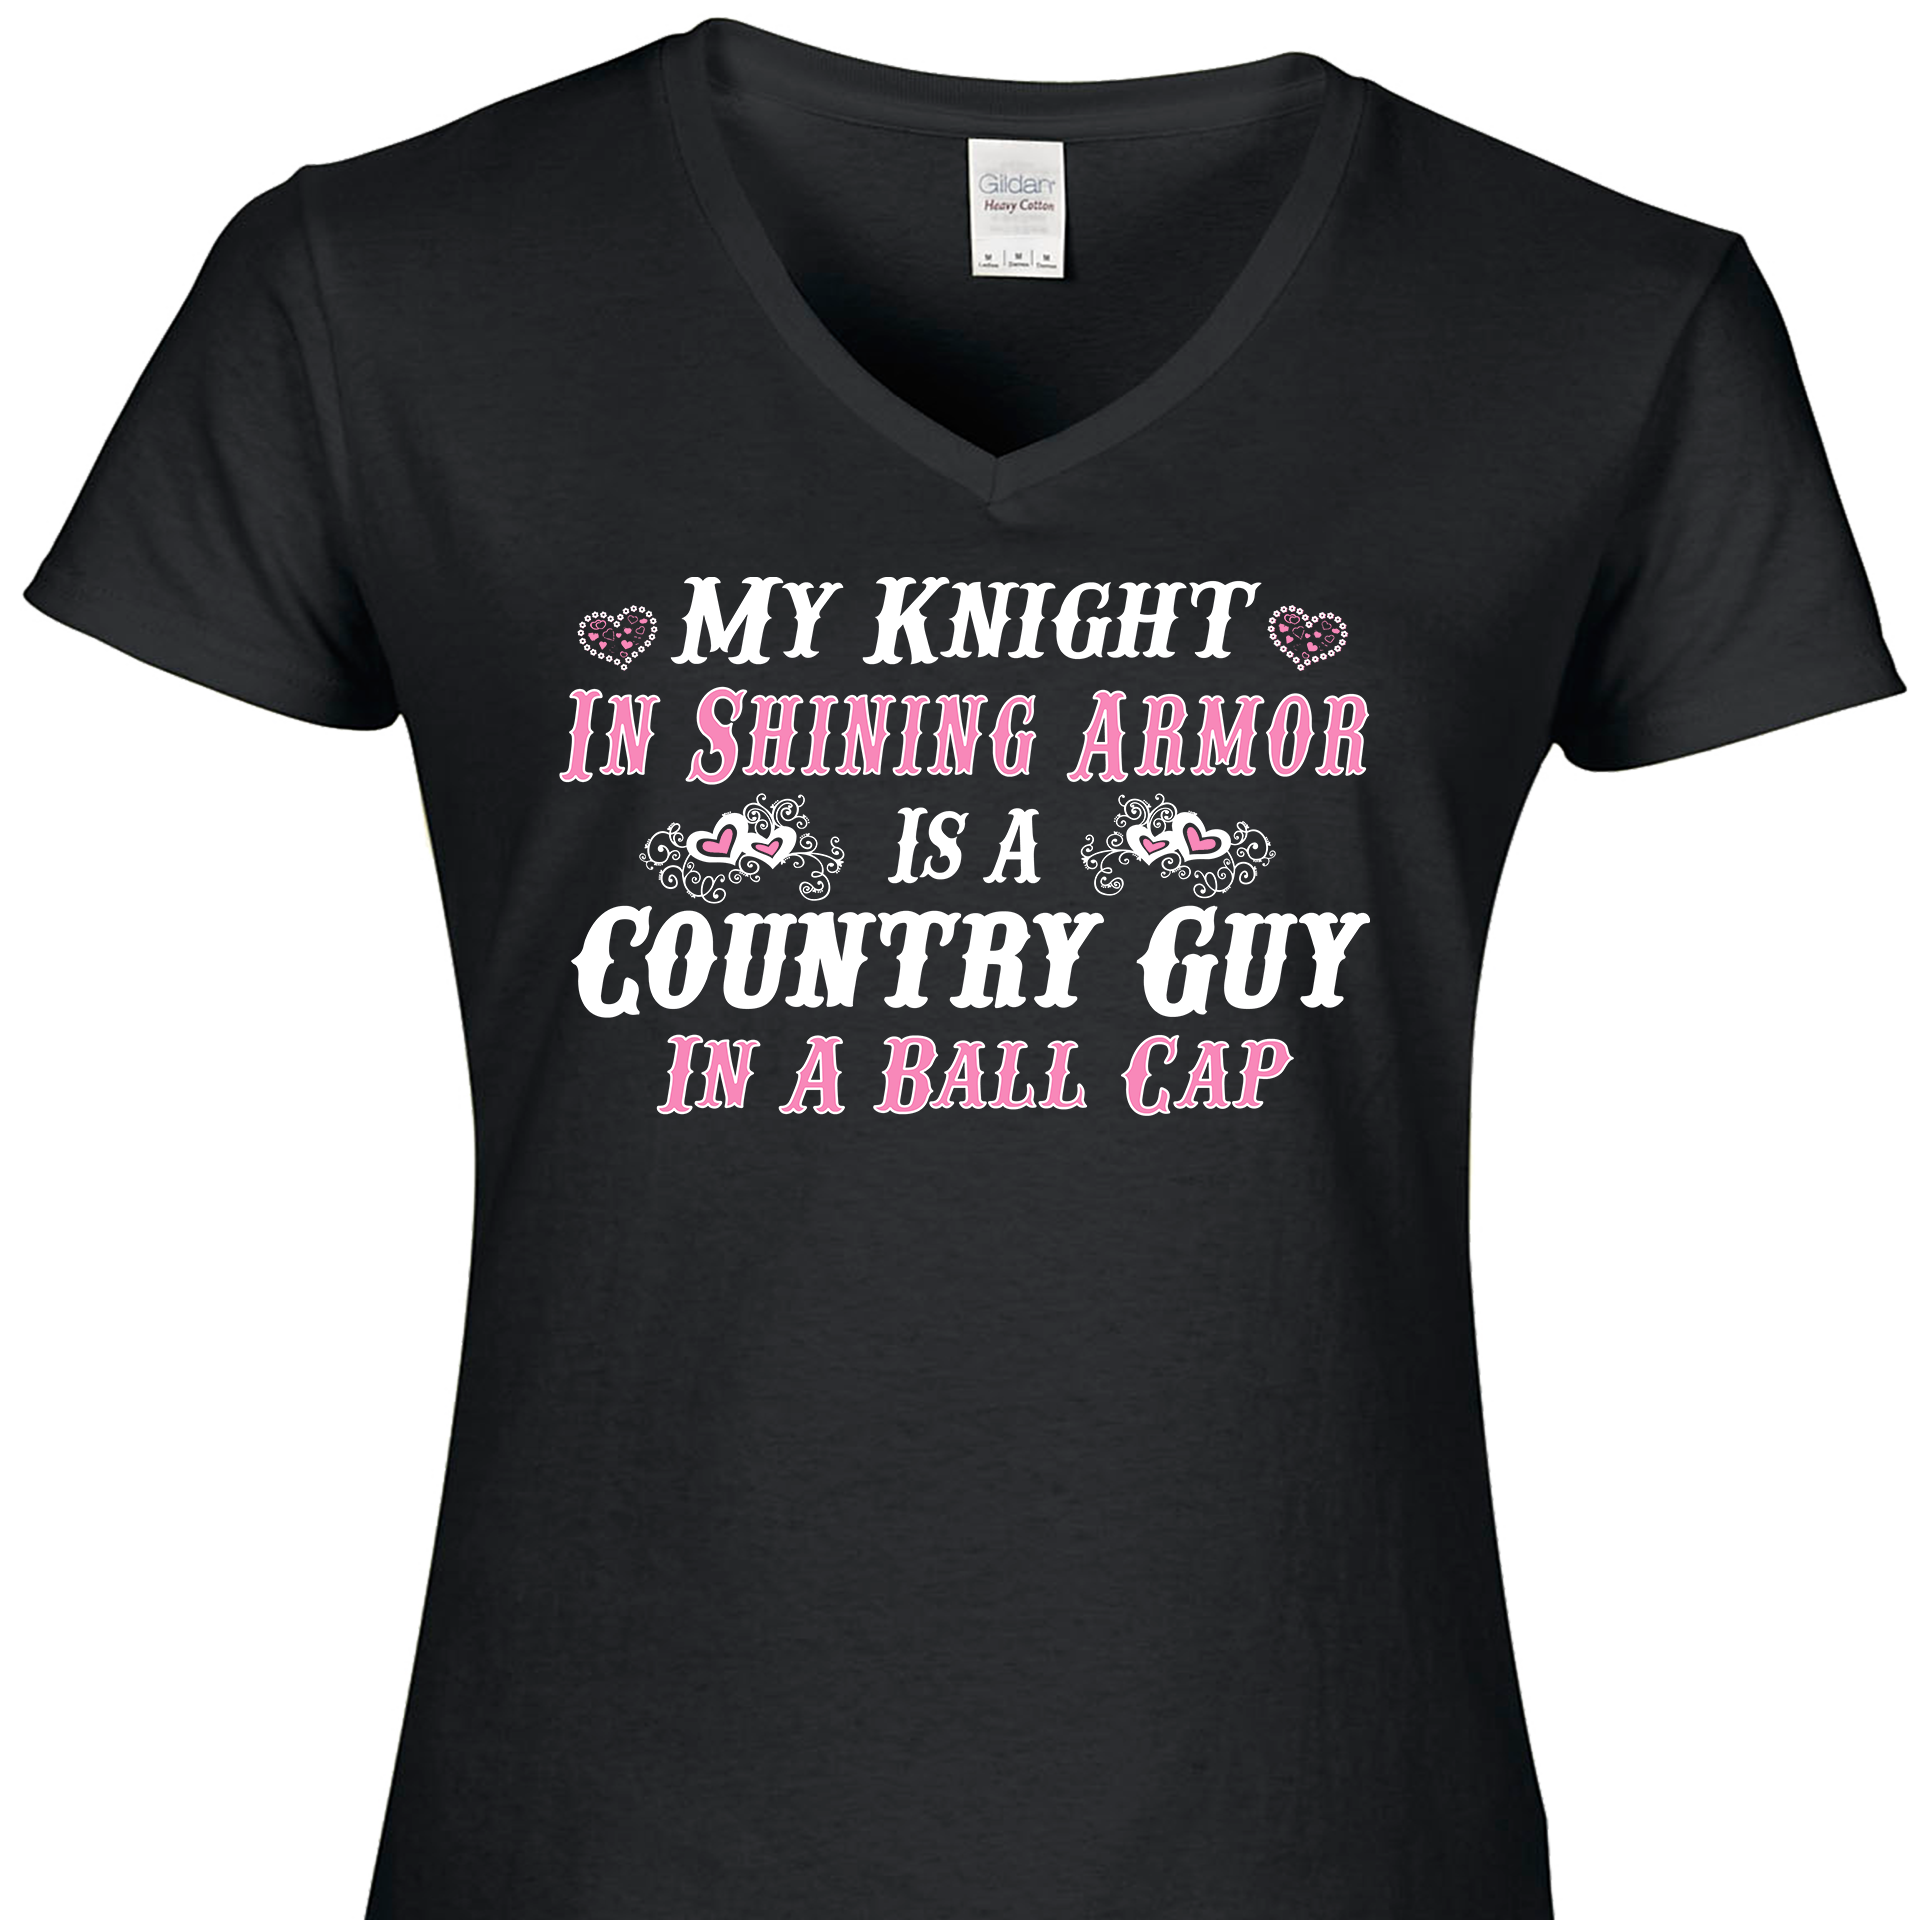 My Knight In Shining Armor Is a Country Guy